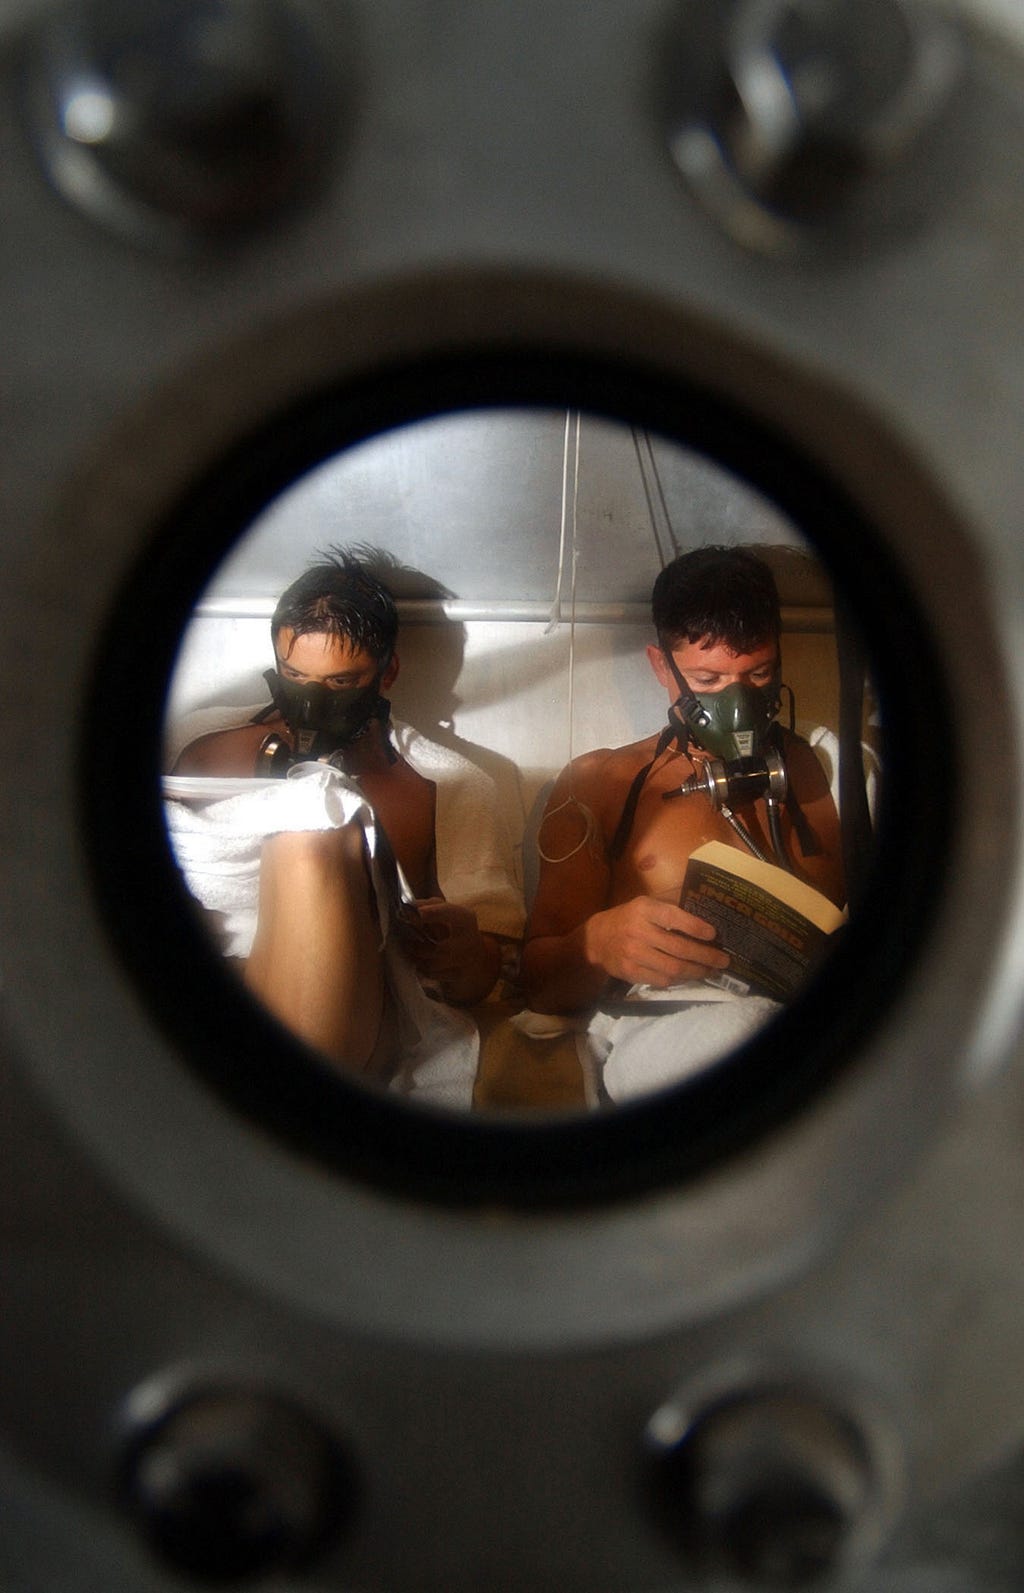 Through the view of a porthole, two young men are seen reading while wearing ocygen masks.